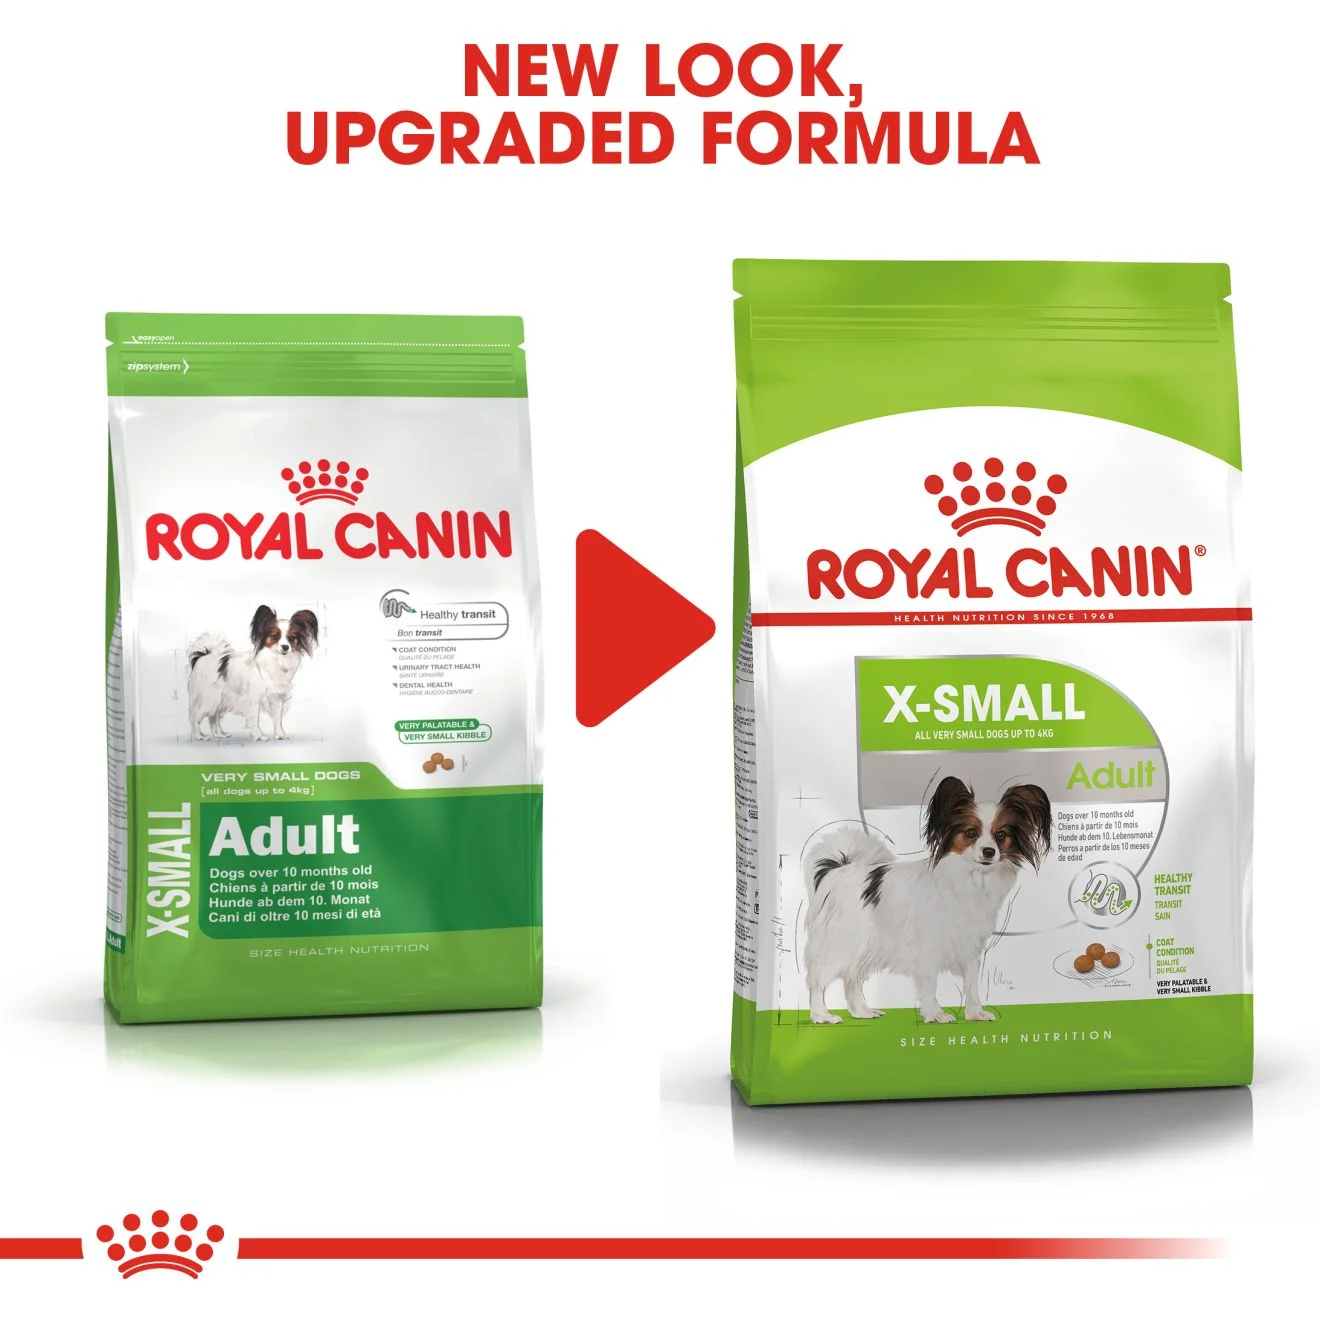 Royal Canin Indoor 27 Dry Cats Food / Royal Canin Indoor Adult 24 Dry Cats Food  / Royal Canin Giant Starter mother and baby dog